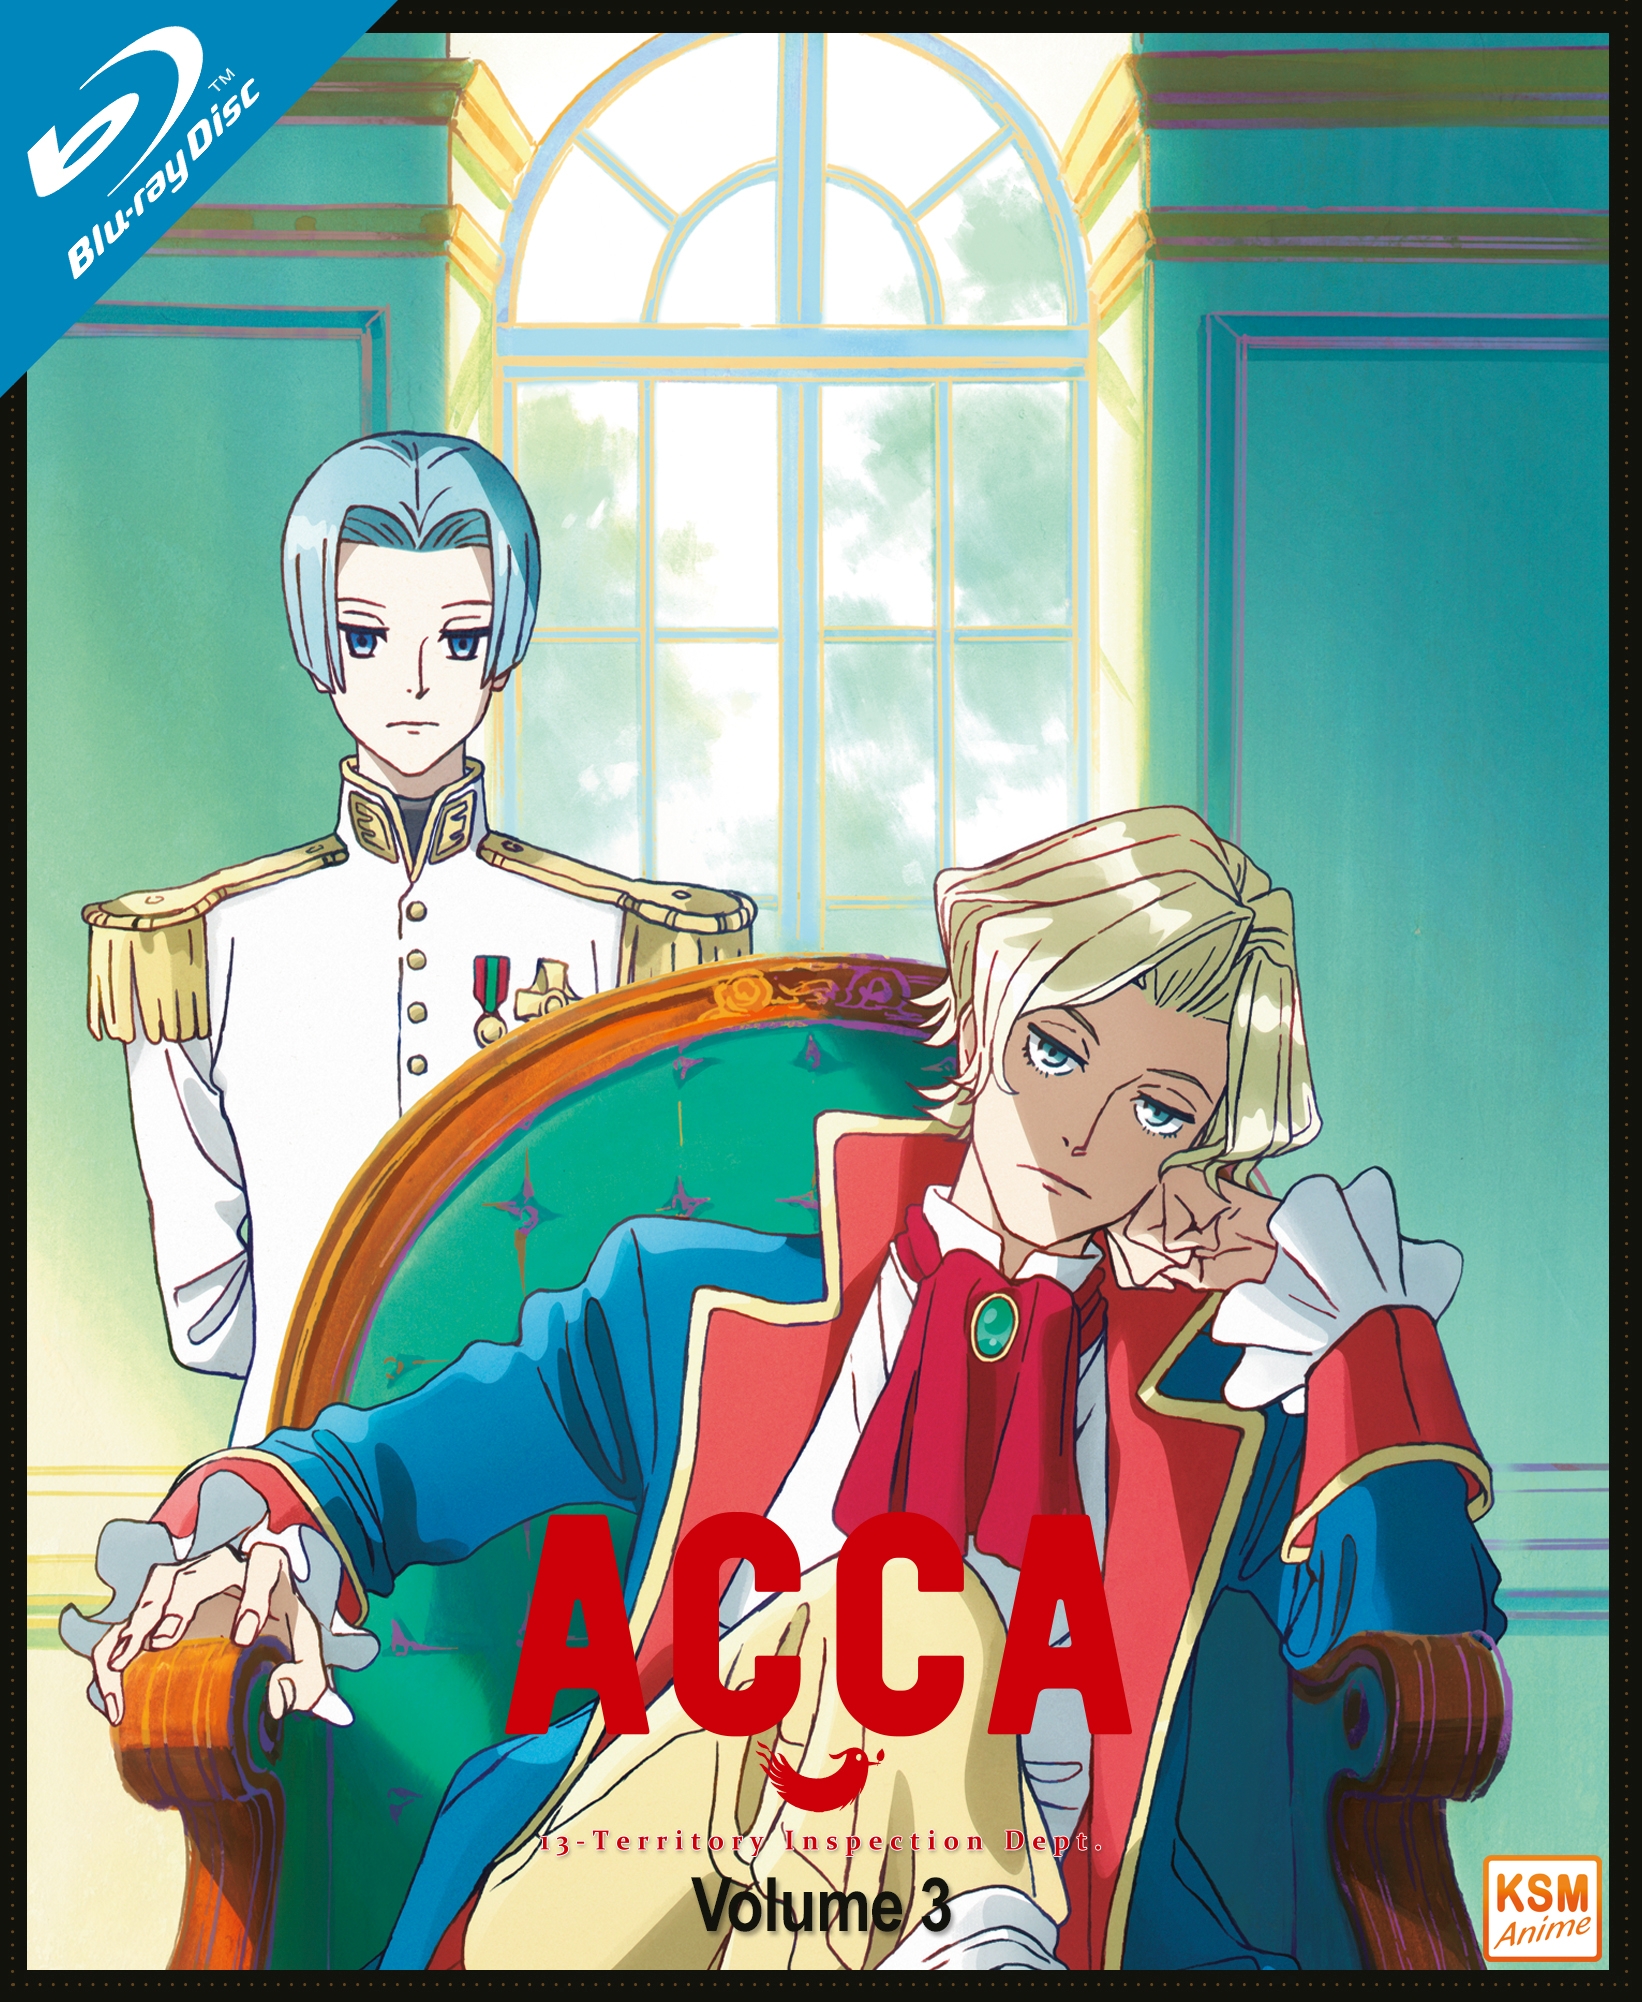 ACCA: 13 Territory Inspection Dept. - Volume 3: Episode 09-12 Blu-ray